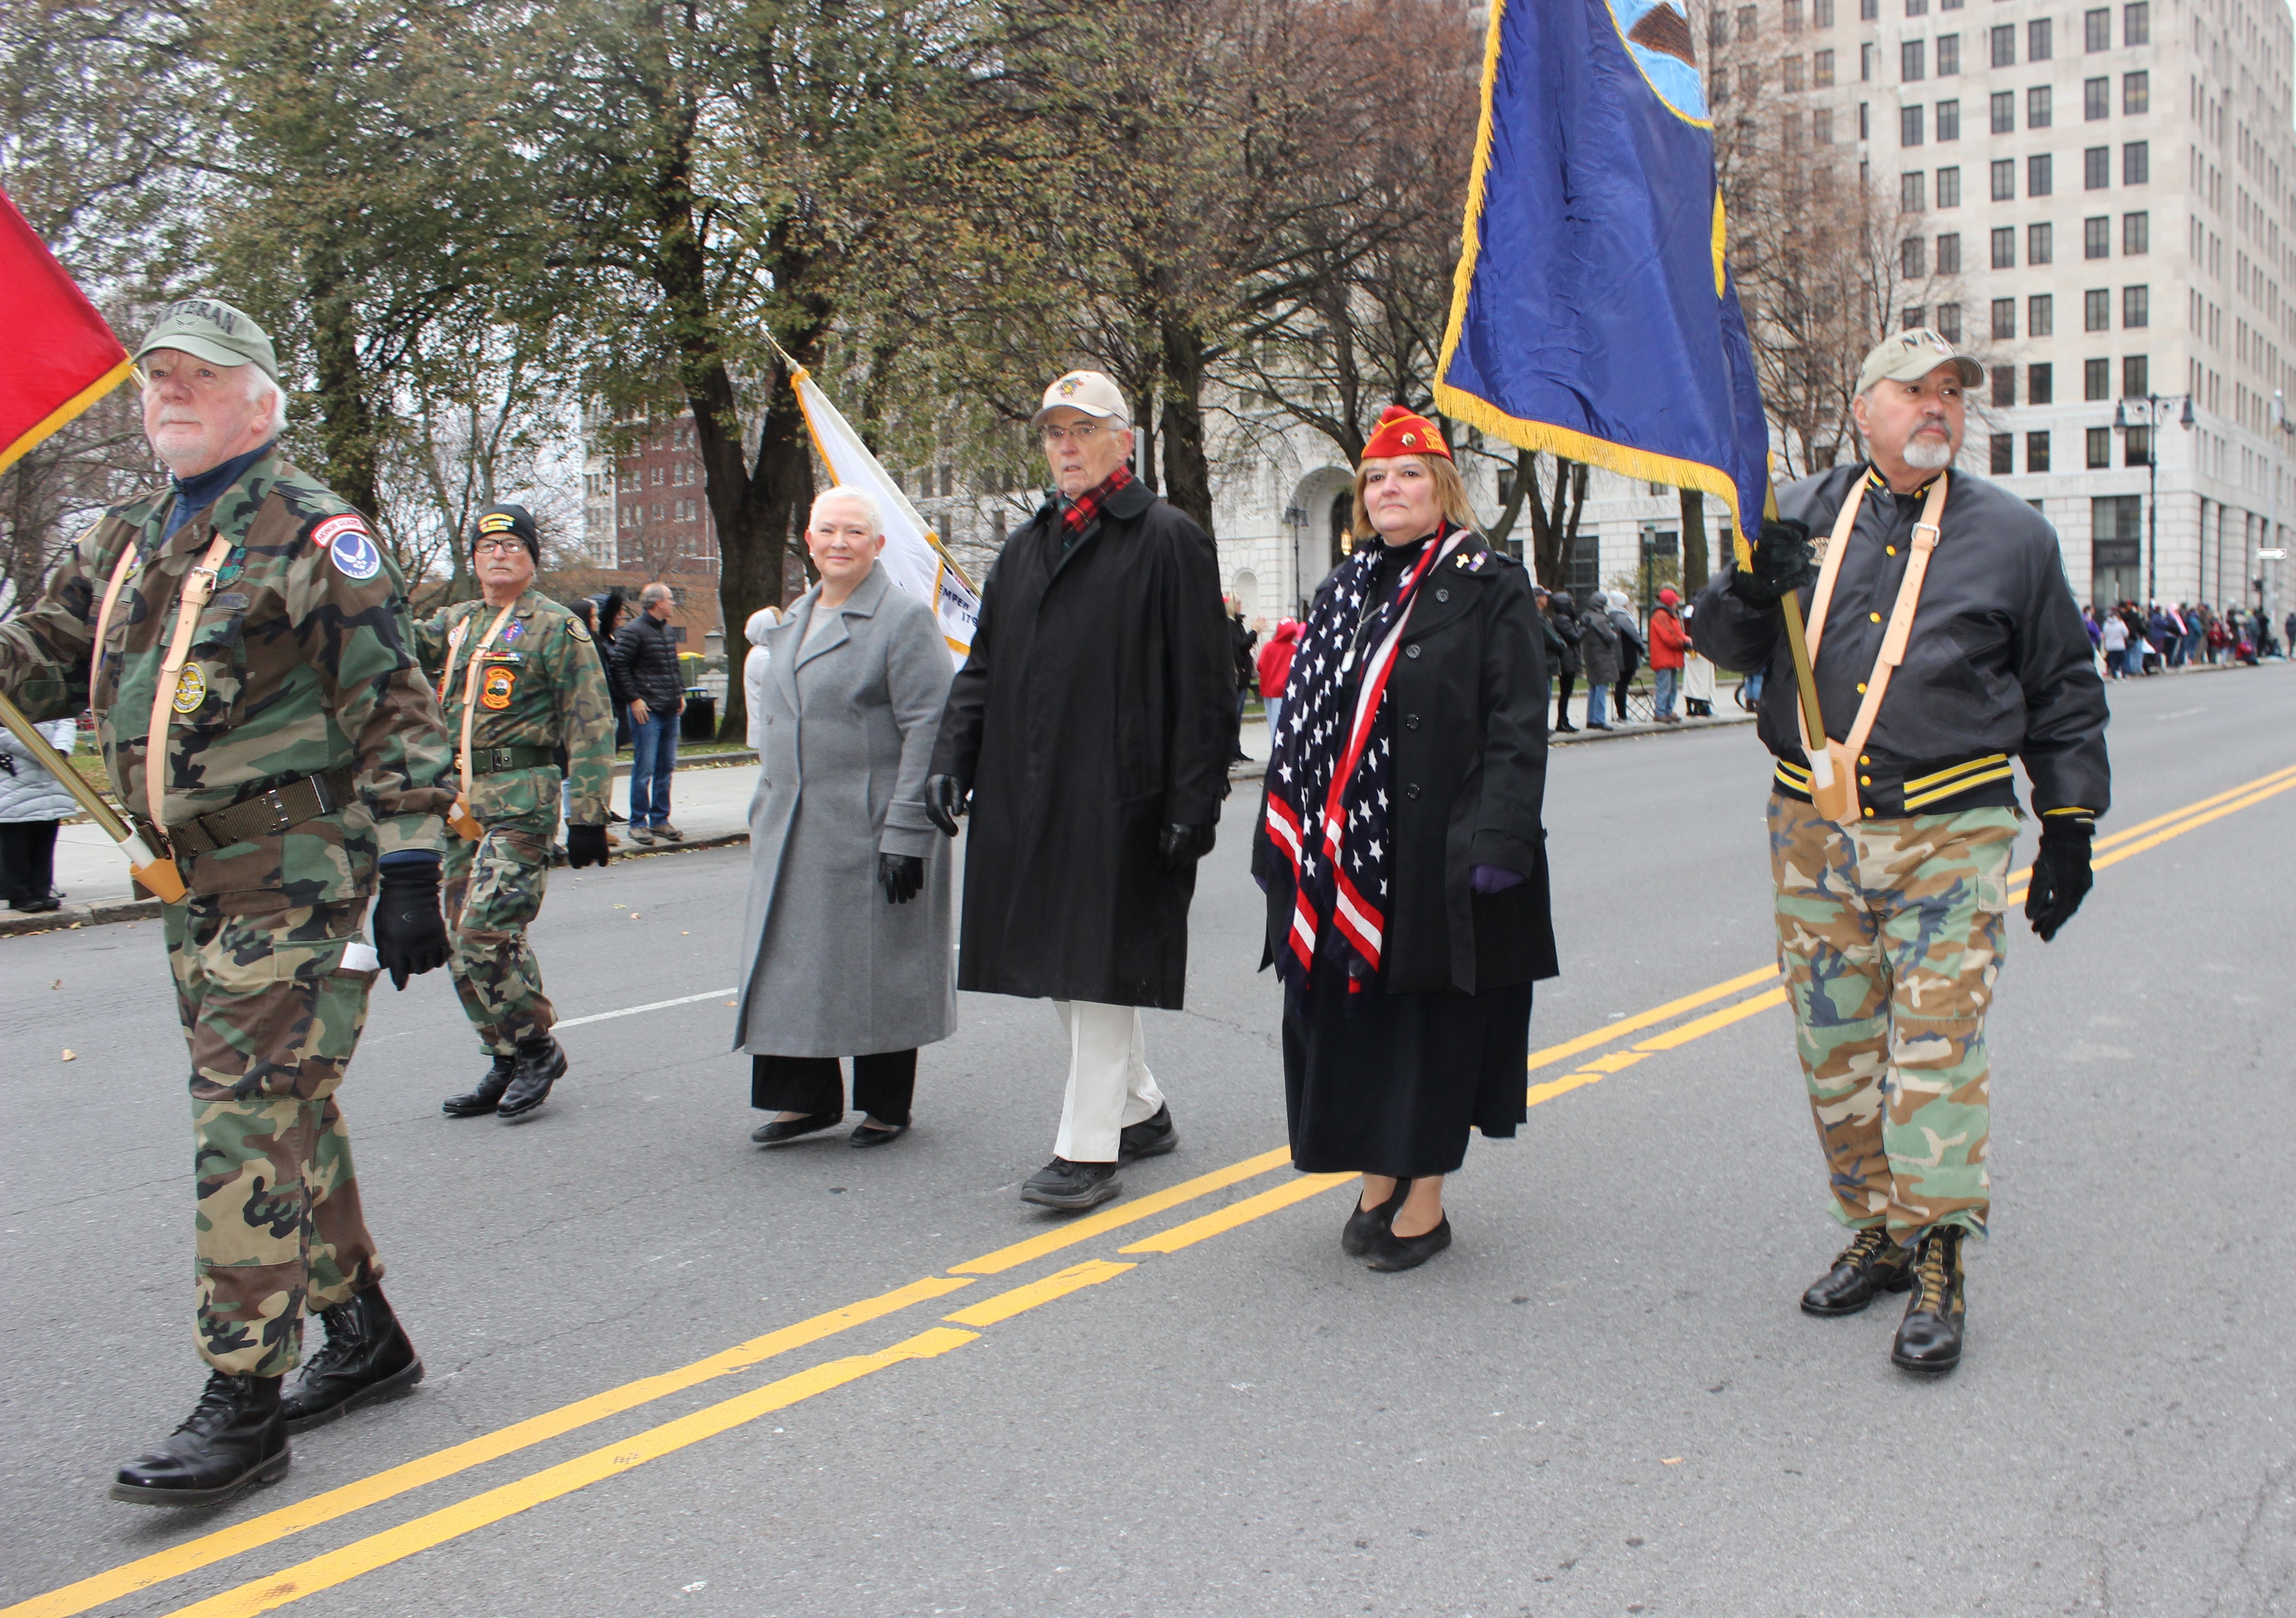 Tri-County Council Vietnam Era Veterans Members in Parade wearing camouflage